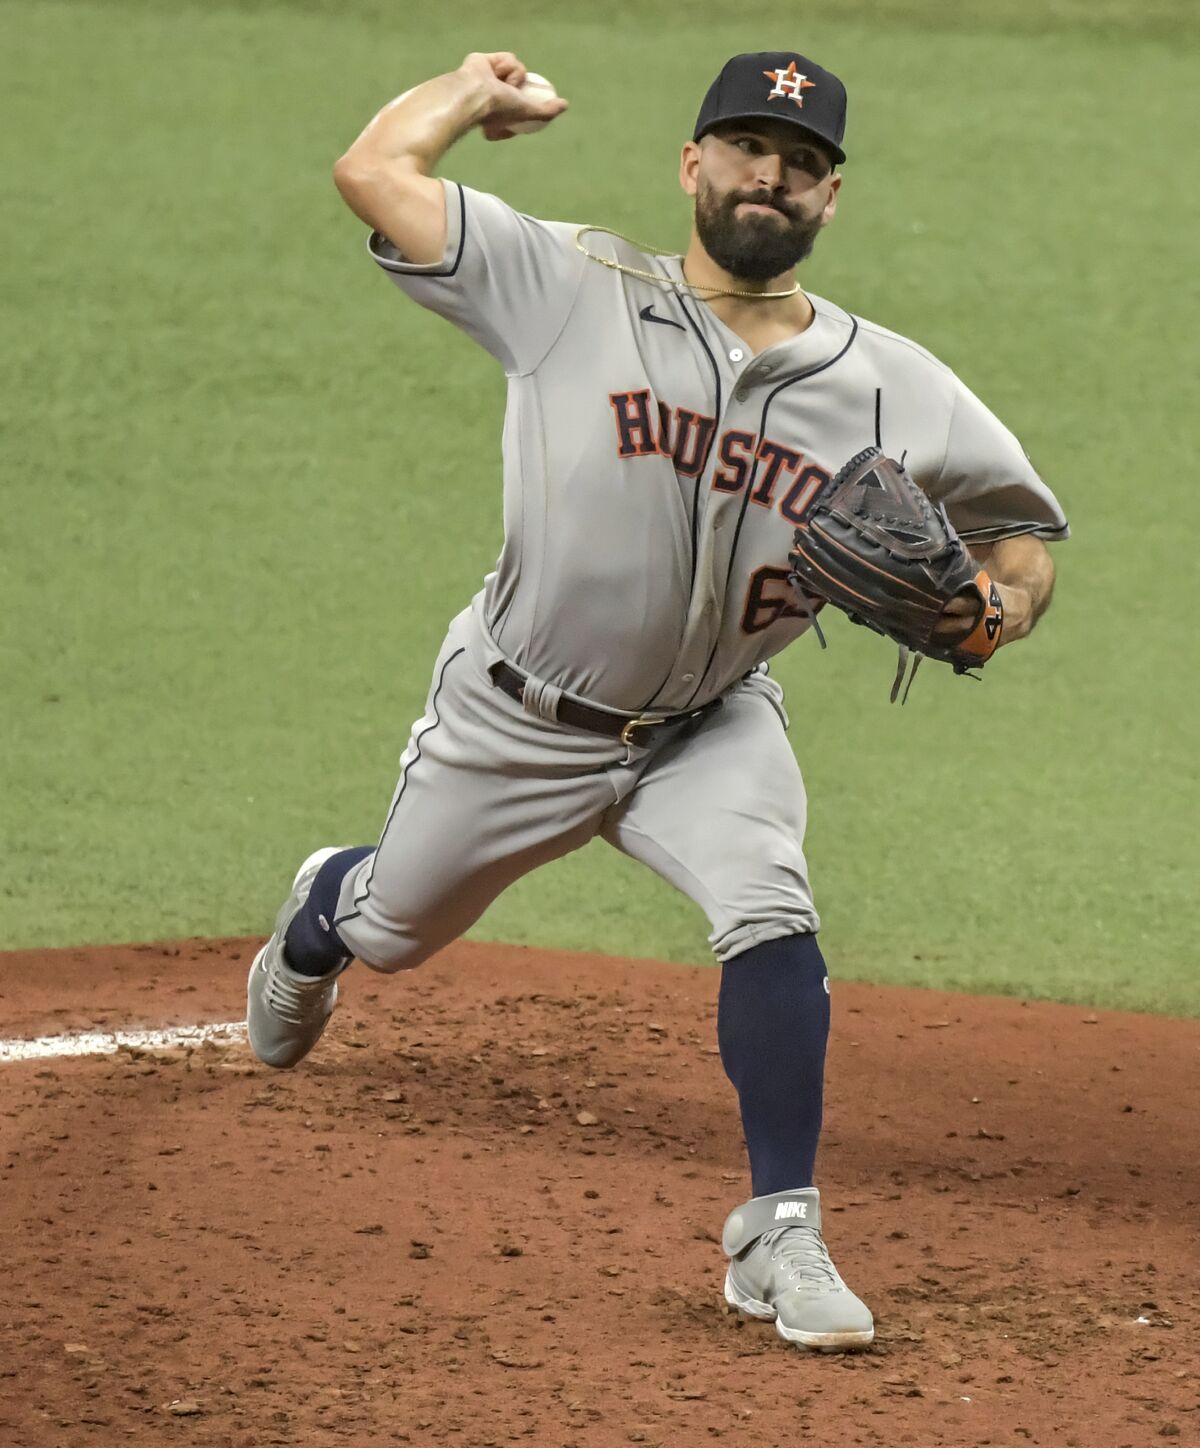 Houston Astros starter Jose Urquidy pitches against the Tampa Bay Rays during the first inning of a baseball game Saturday, May 1, 2021, in St. Petersburg, Fla. (AP Photo/Steve Nesius)